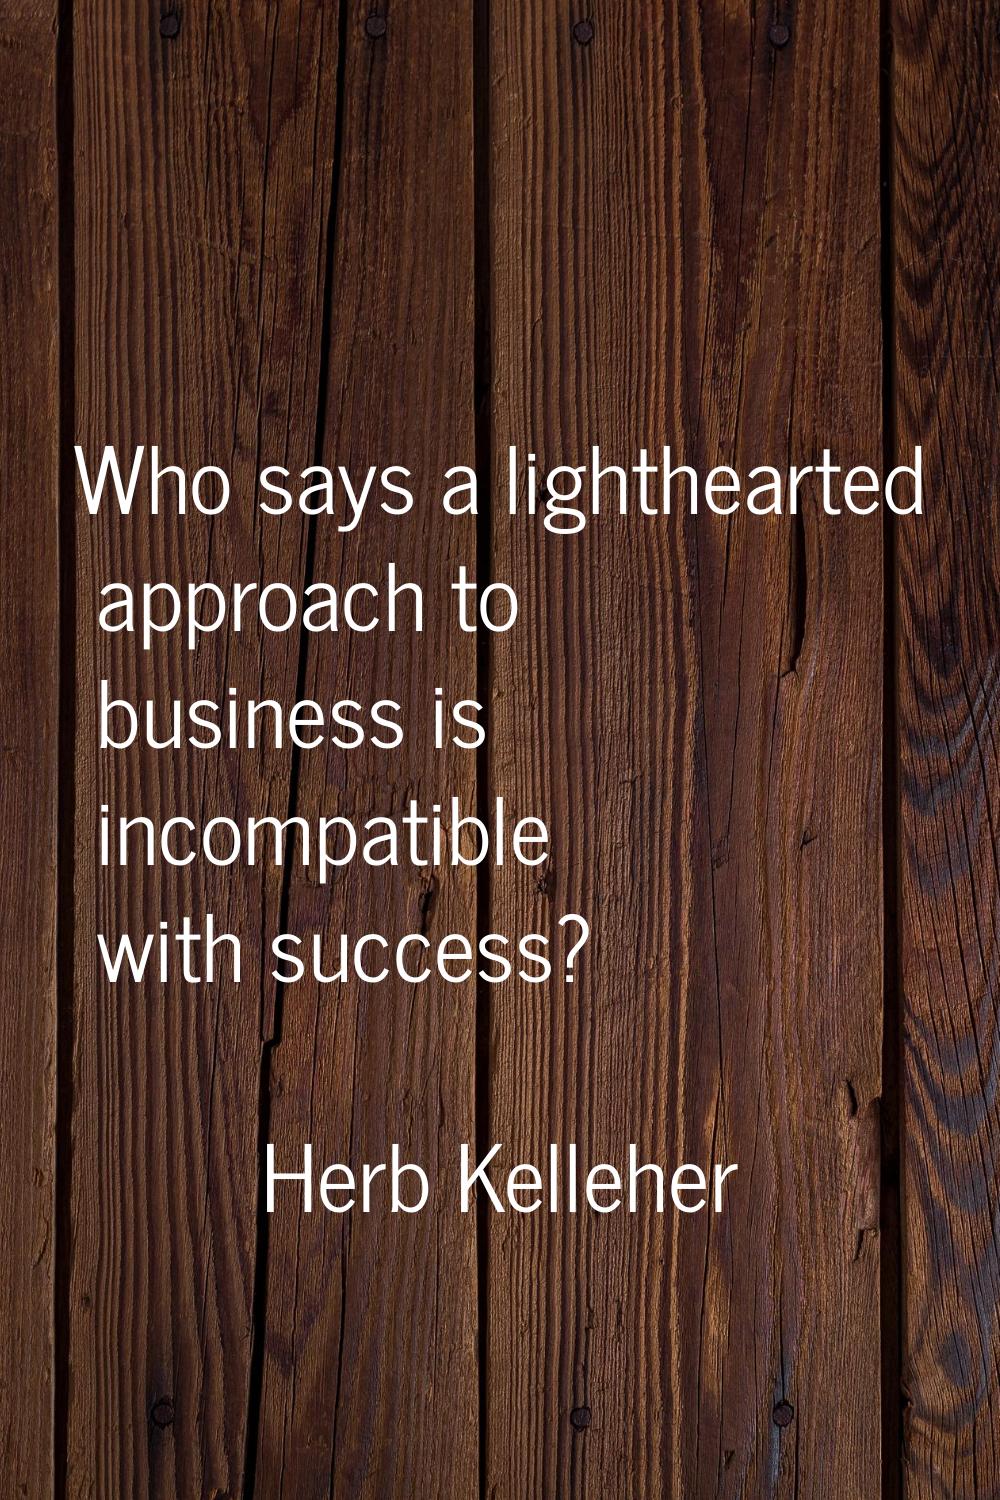 Who says a lighthearted approach to business is incompatible with success?